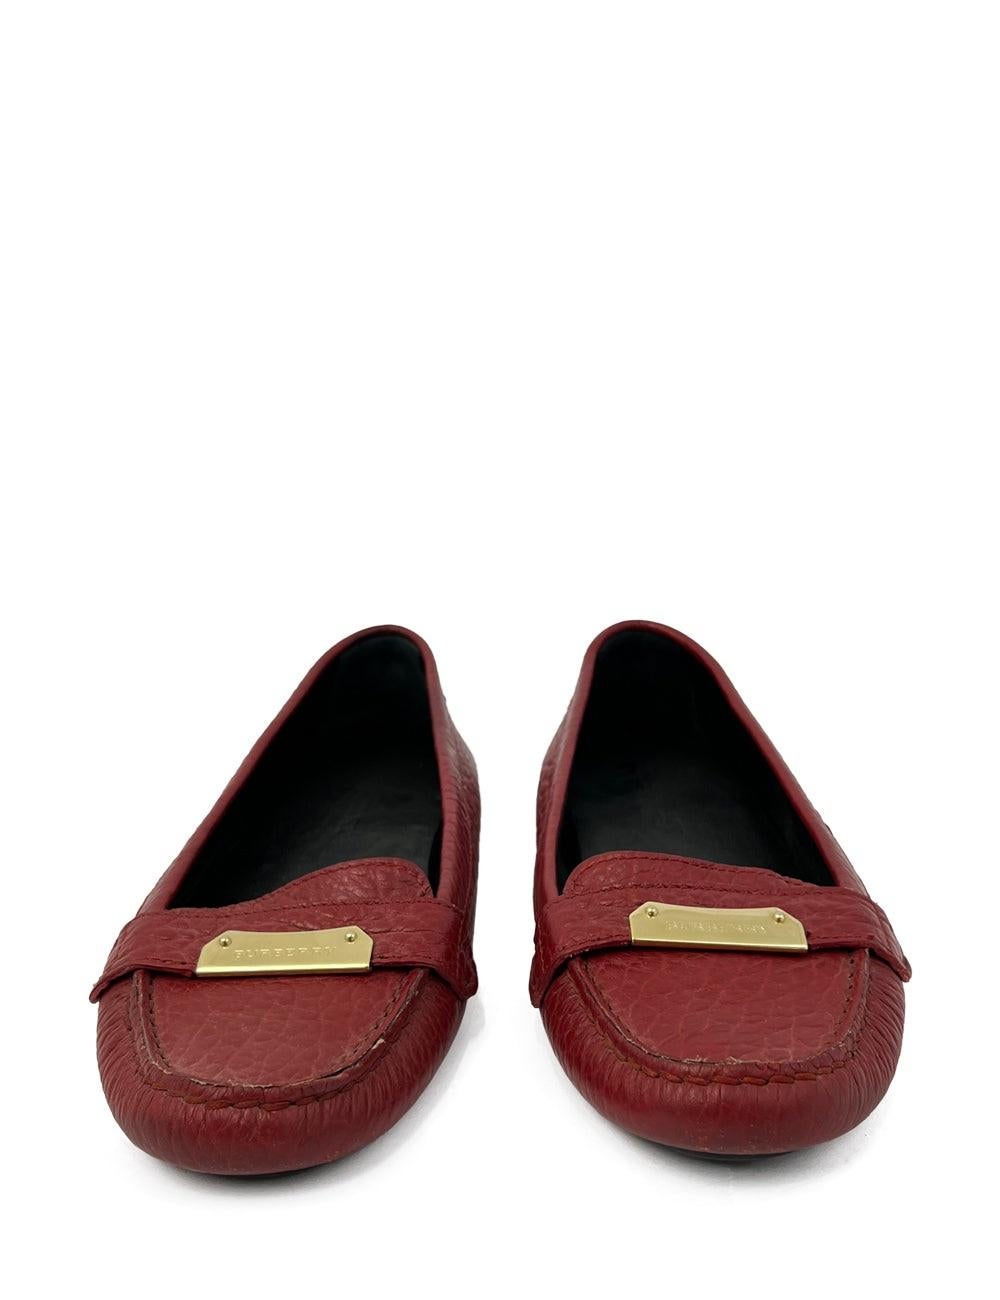 Red leather Burberry Loafers. In excellent condition.

Additional information:
Material: Leather
Size: EU 38
Overall Condition: Very Good
Interior Condition: Signs of wear
Exterior Condition: Light leather scuffing